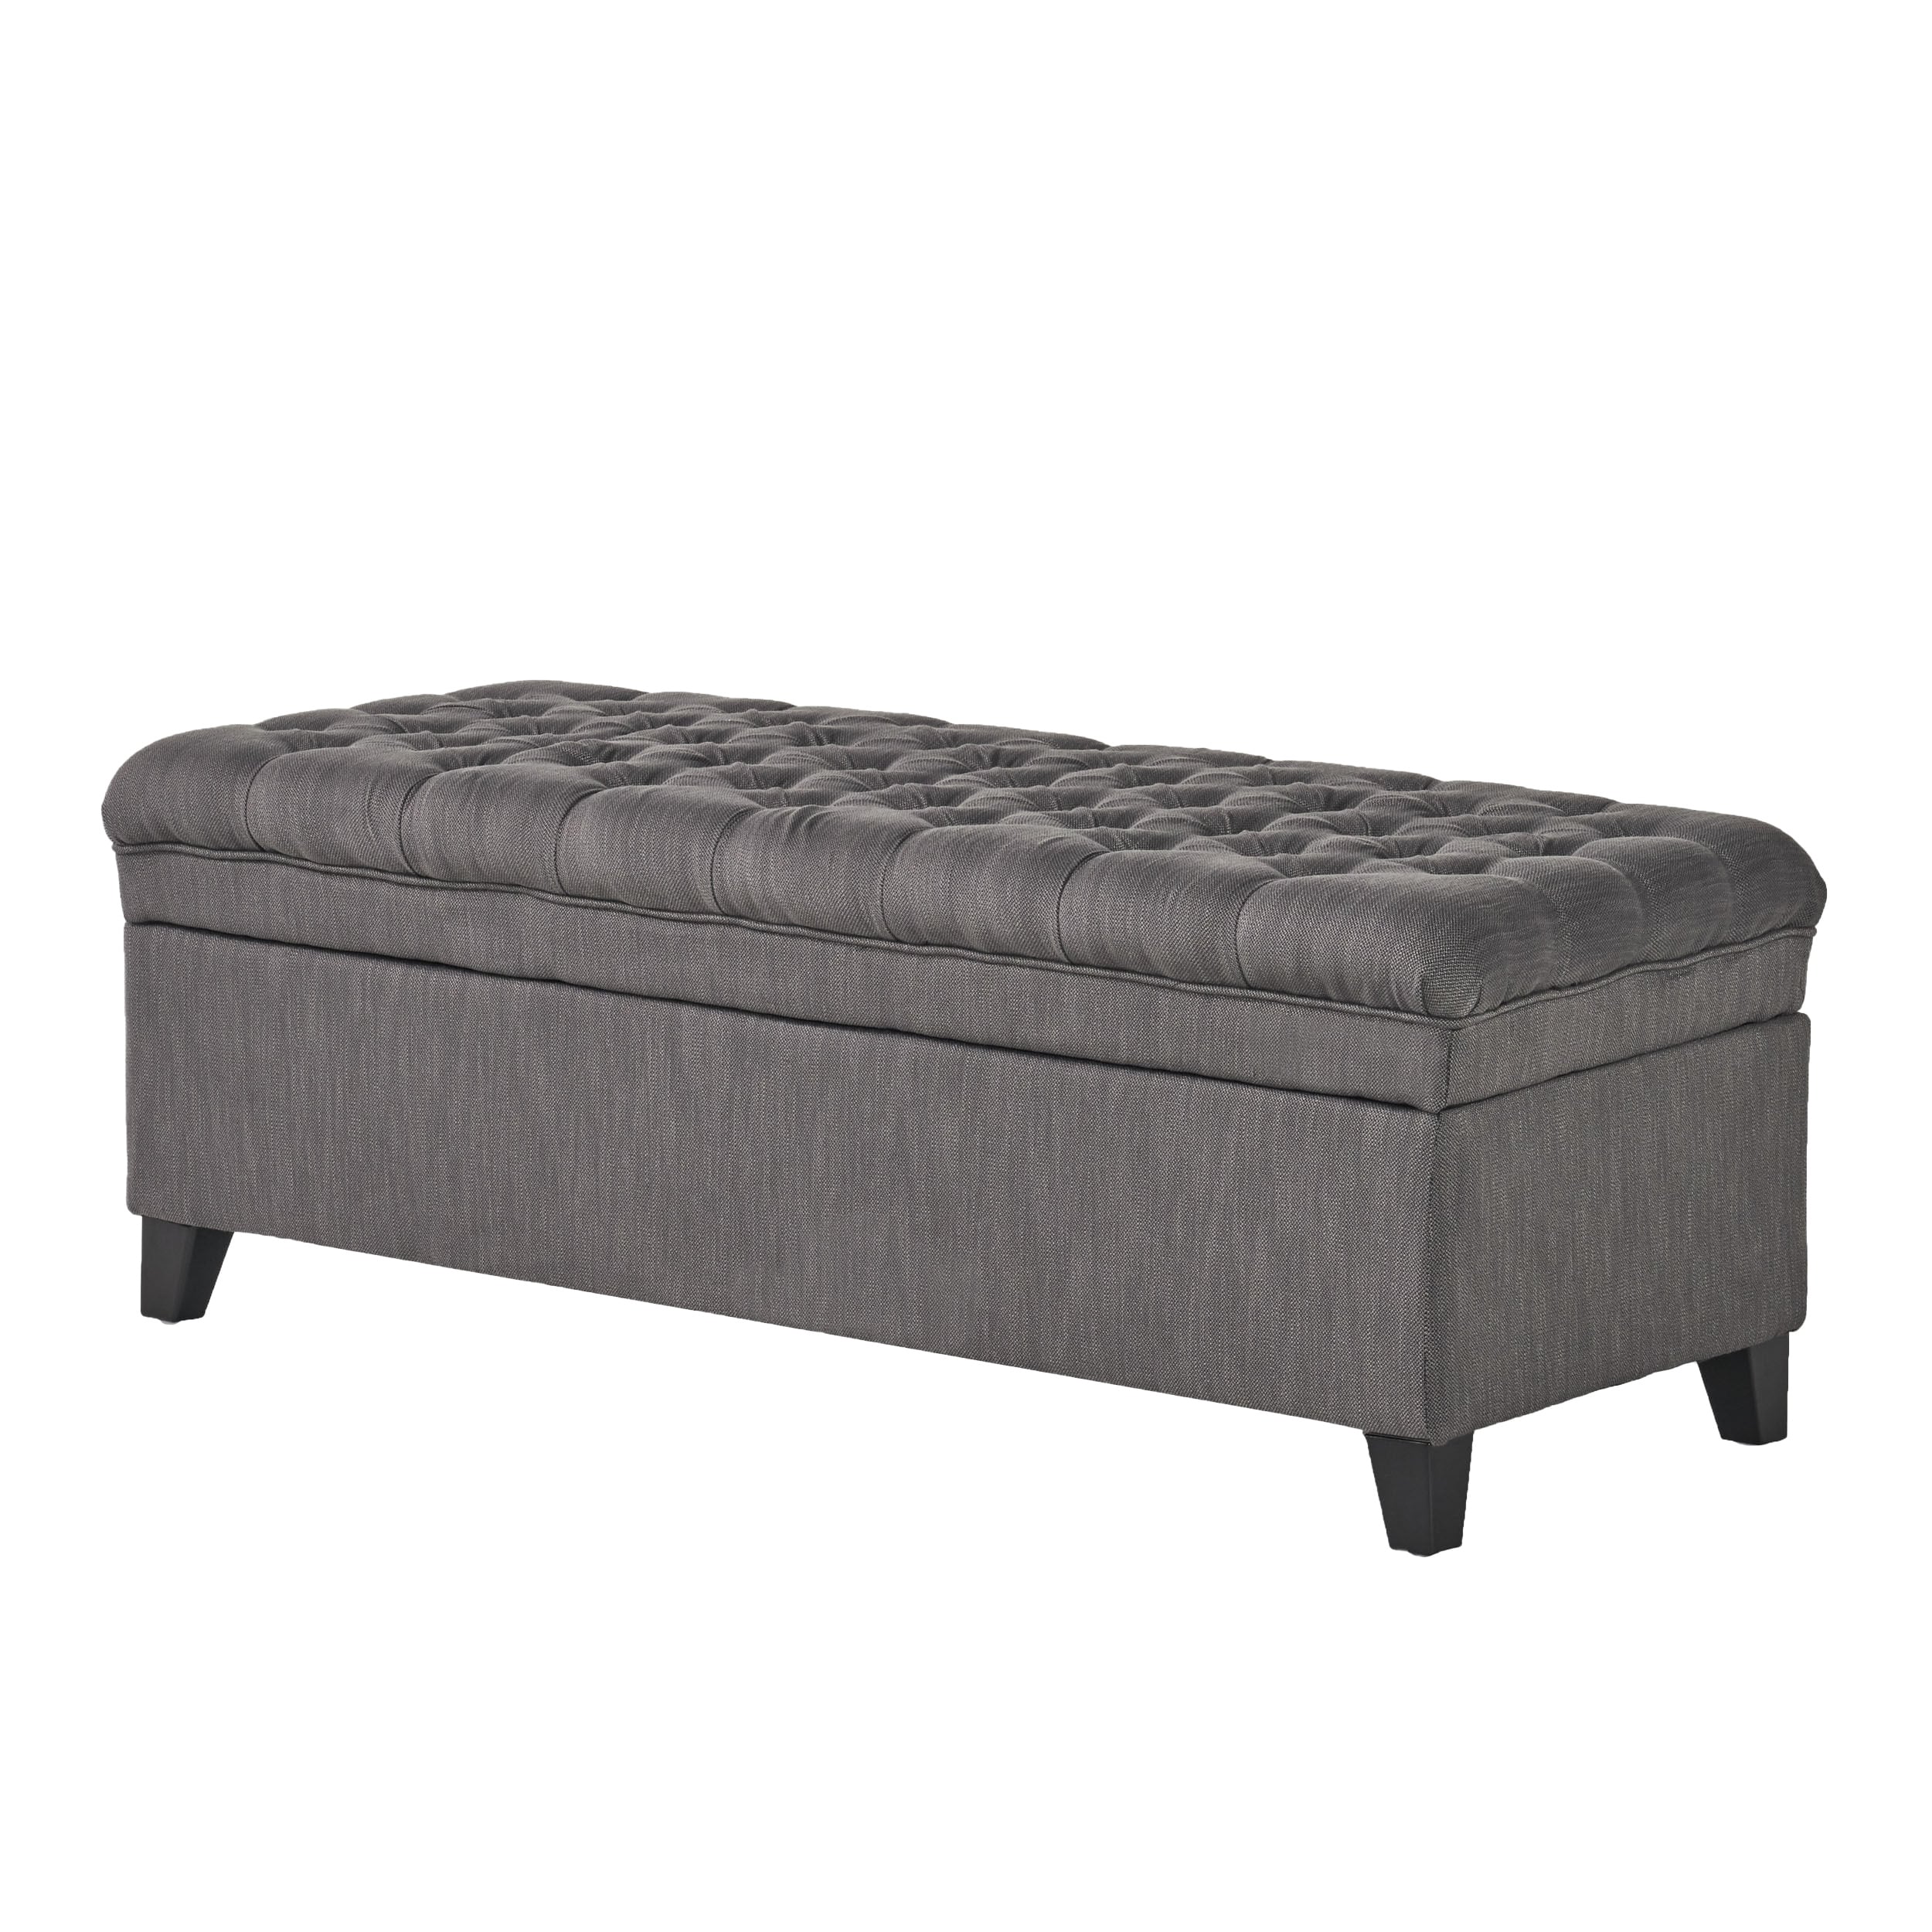 https://ak1.ostkcdn.com/images/products/is/images/direct/0e5af429346af19c66d91acea04c3ad20f554c8d/Hastings-Tufted-Fabric-Storage-Ottoman-Bench-by-Christopher-Knight-Home.jpg